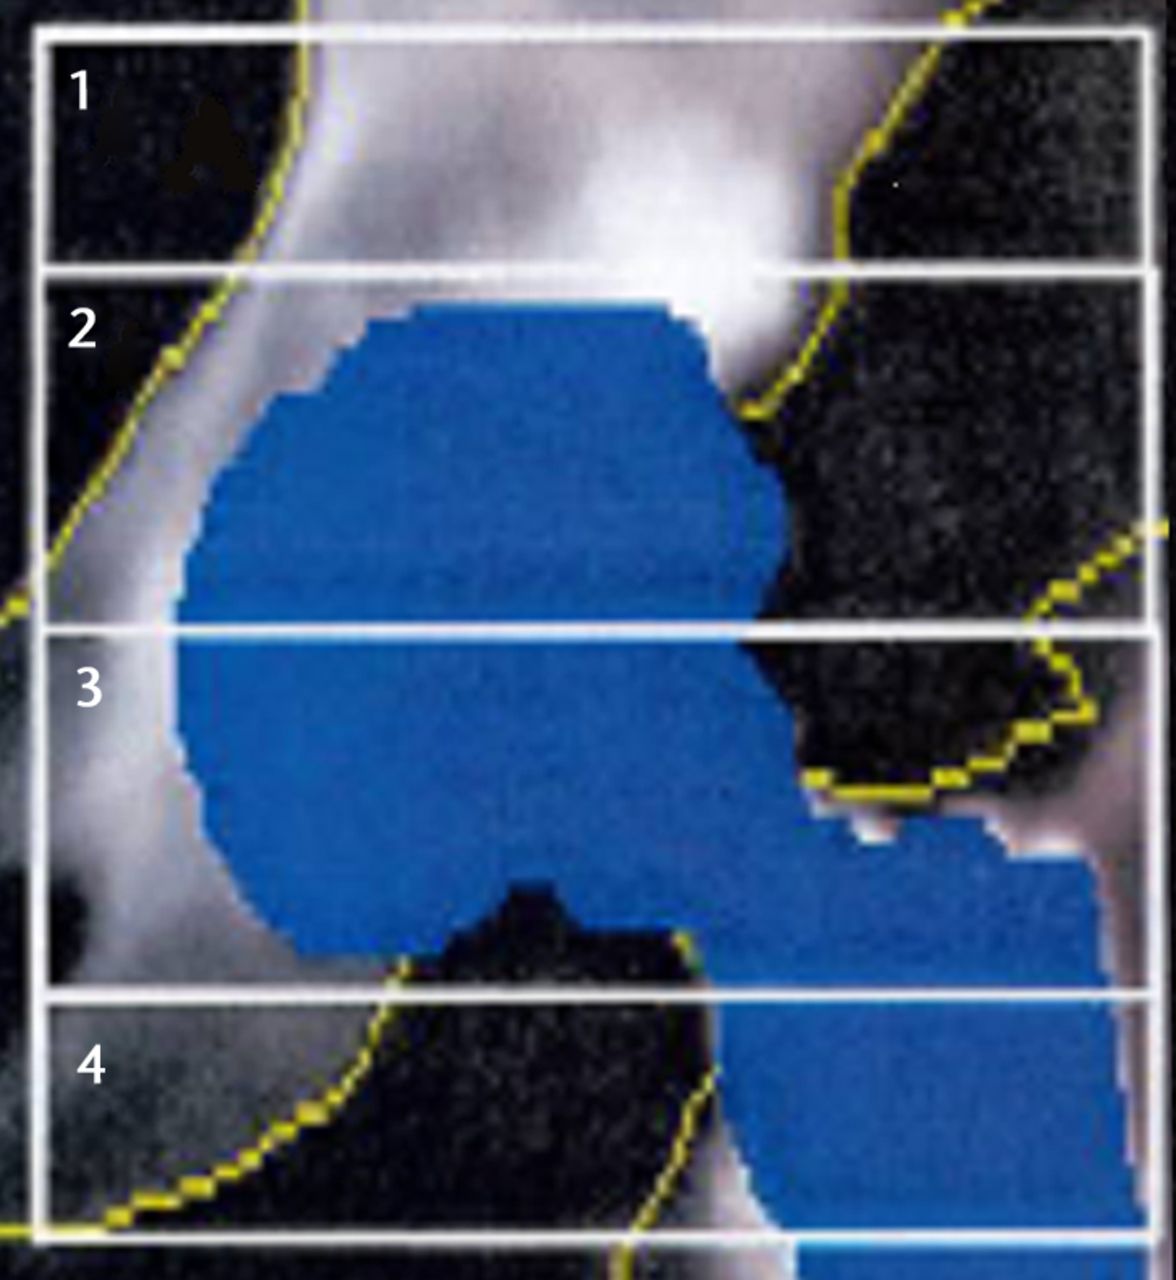 Figs. 2a - 2b 
          Images showing the regions of interest
for the assessment of bone mineral density in a) the affected hip
and b) the contralateral hip.
        